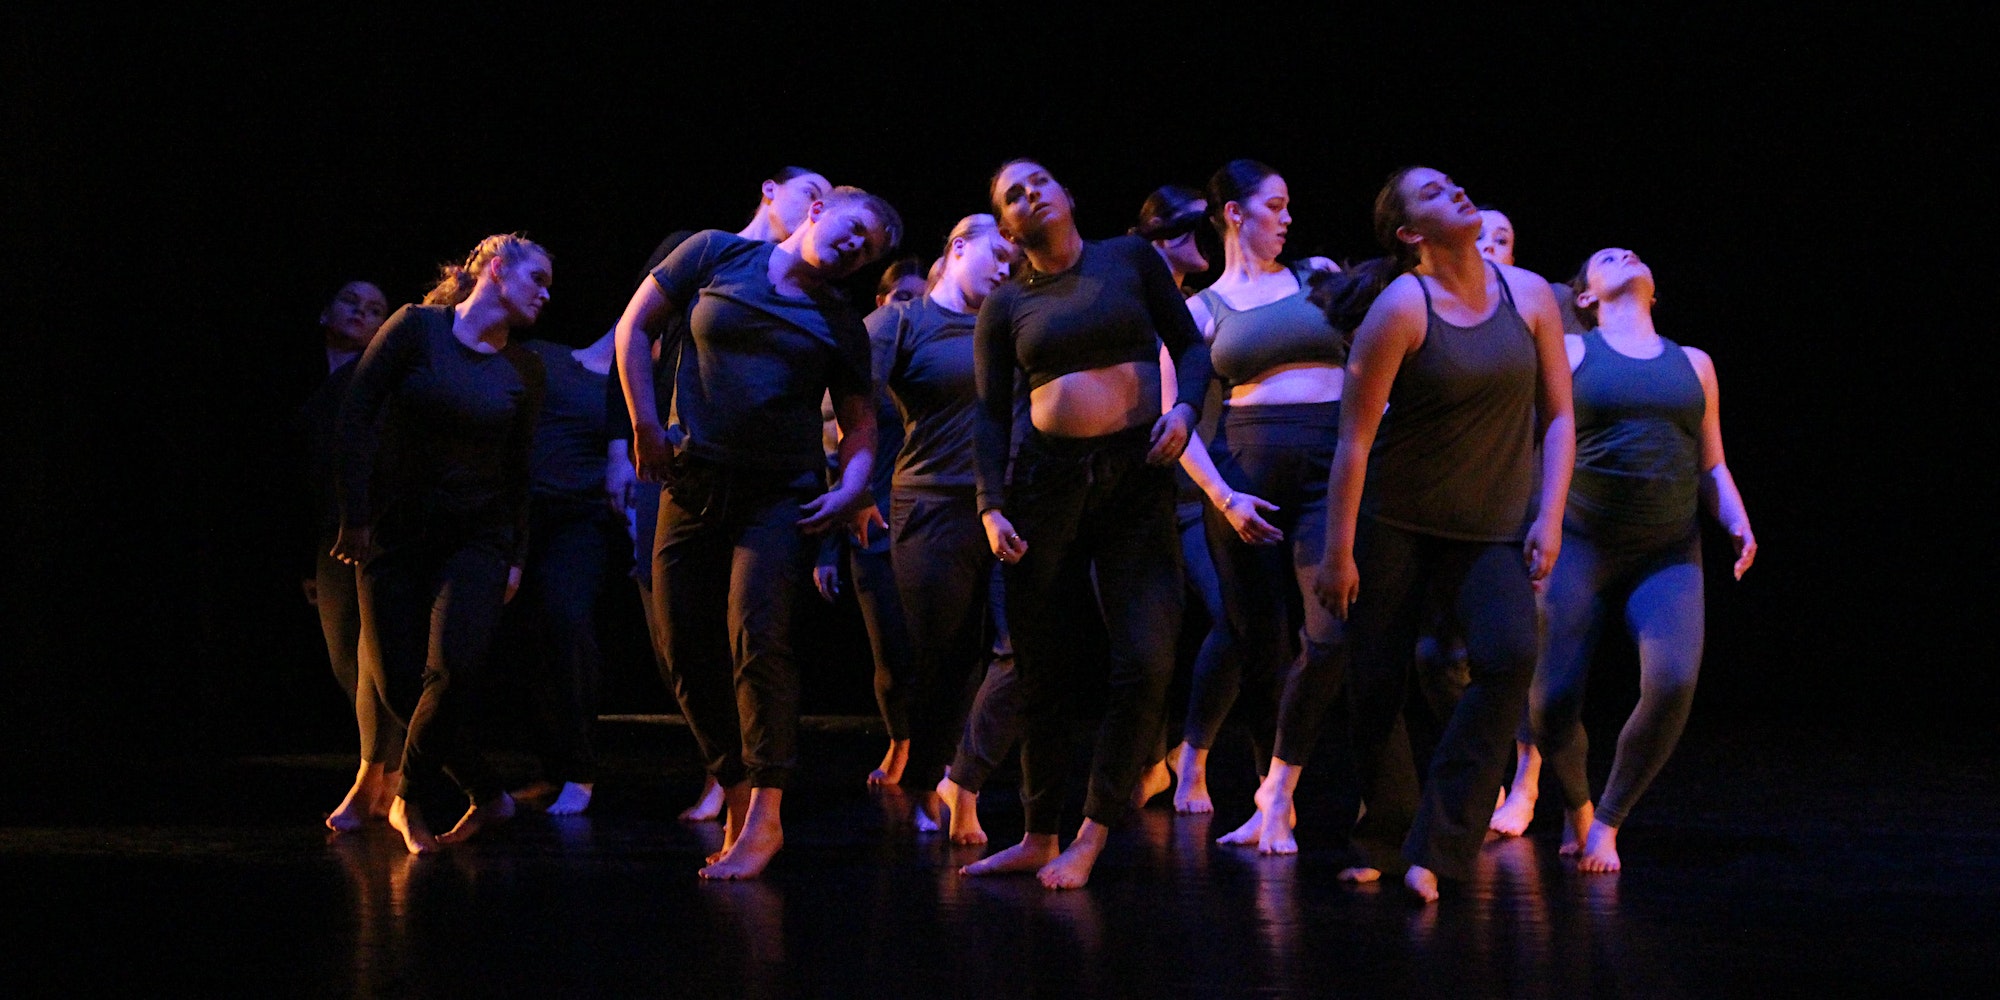 An ensemble of performers gracefully dancing on a live stage.